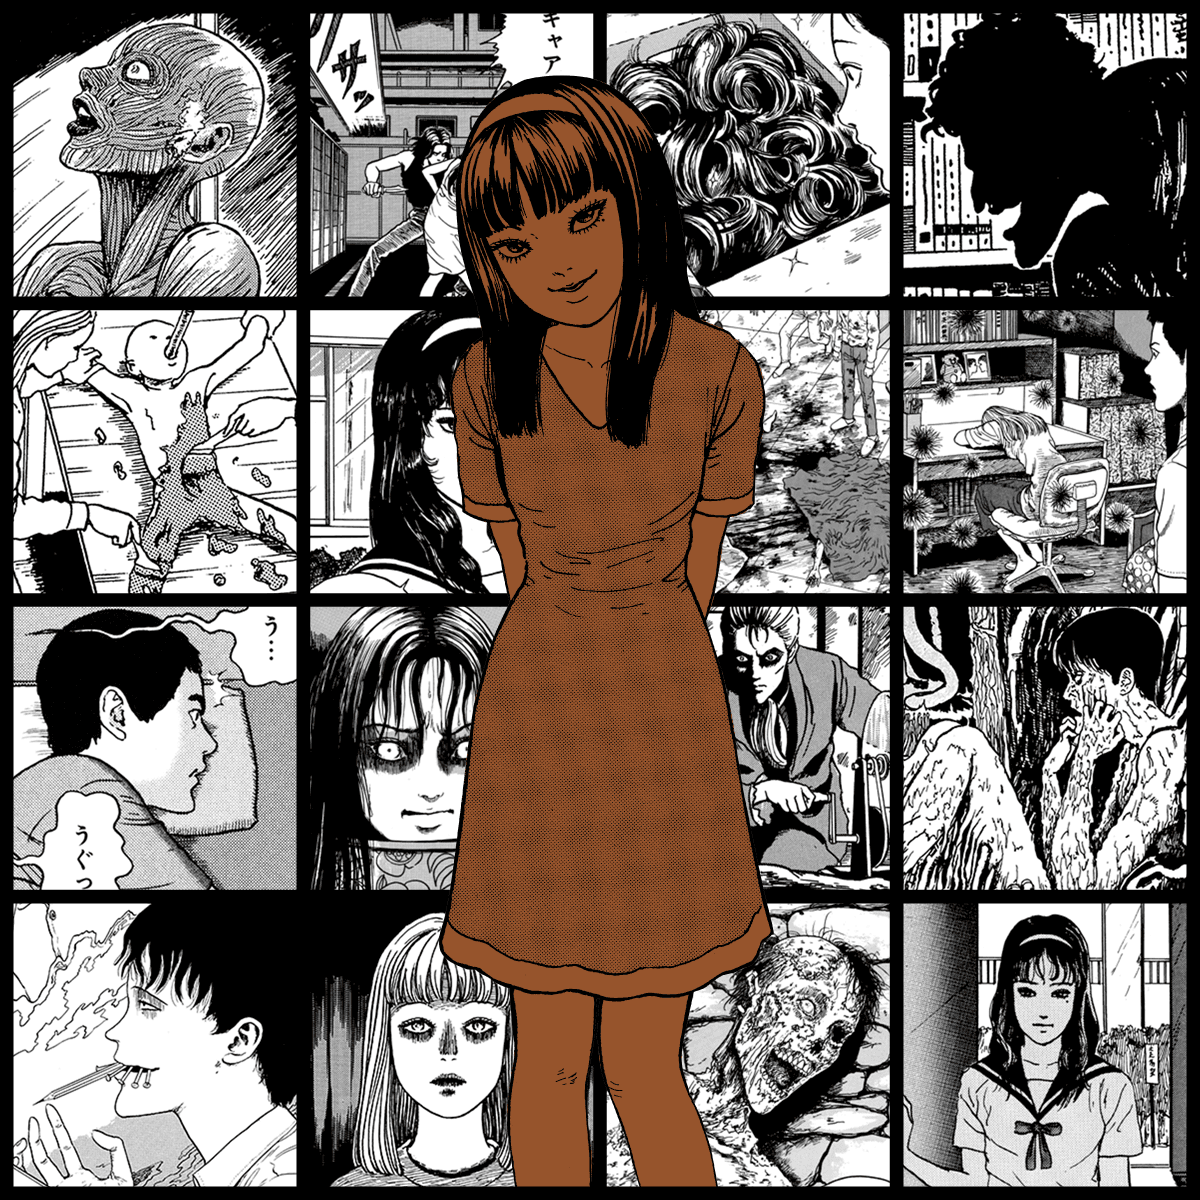 TOMIE by Junji Ito #1445